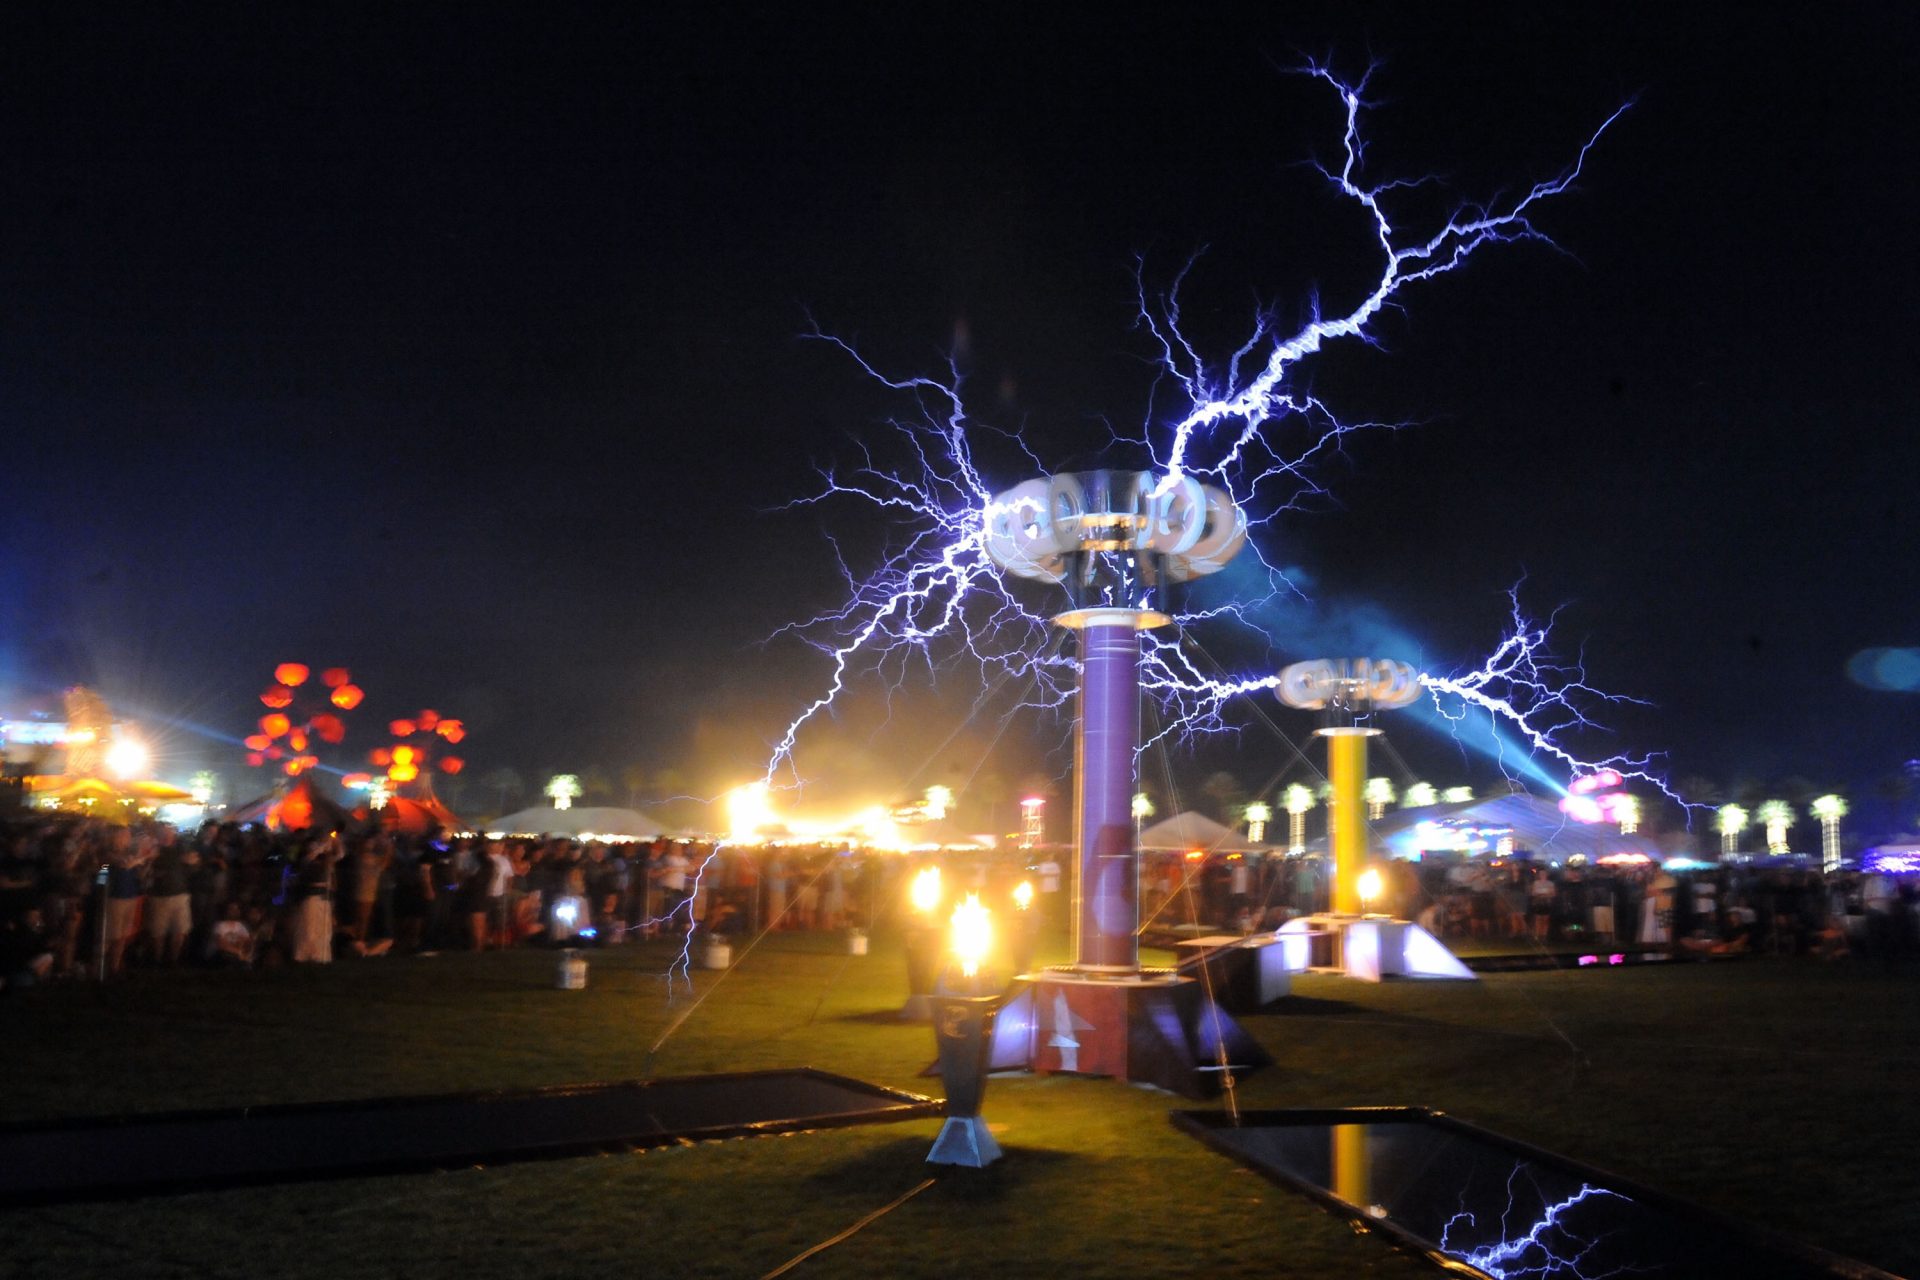 The Tesla coil pushed the limits of electrical understanding